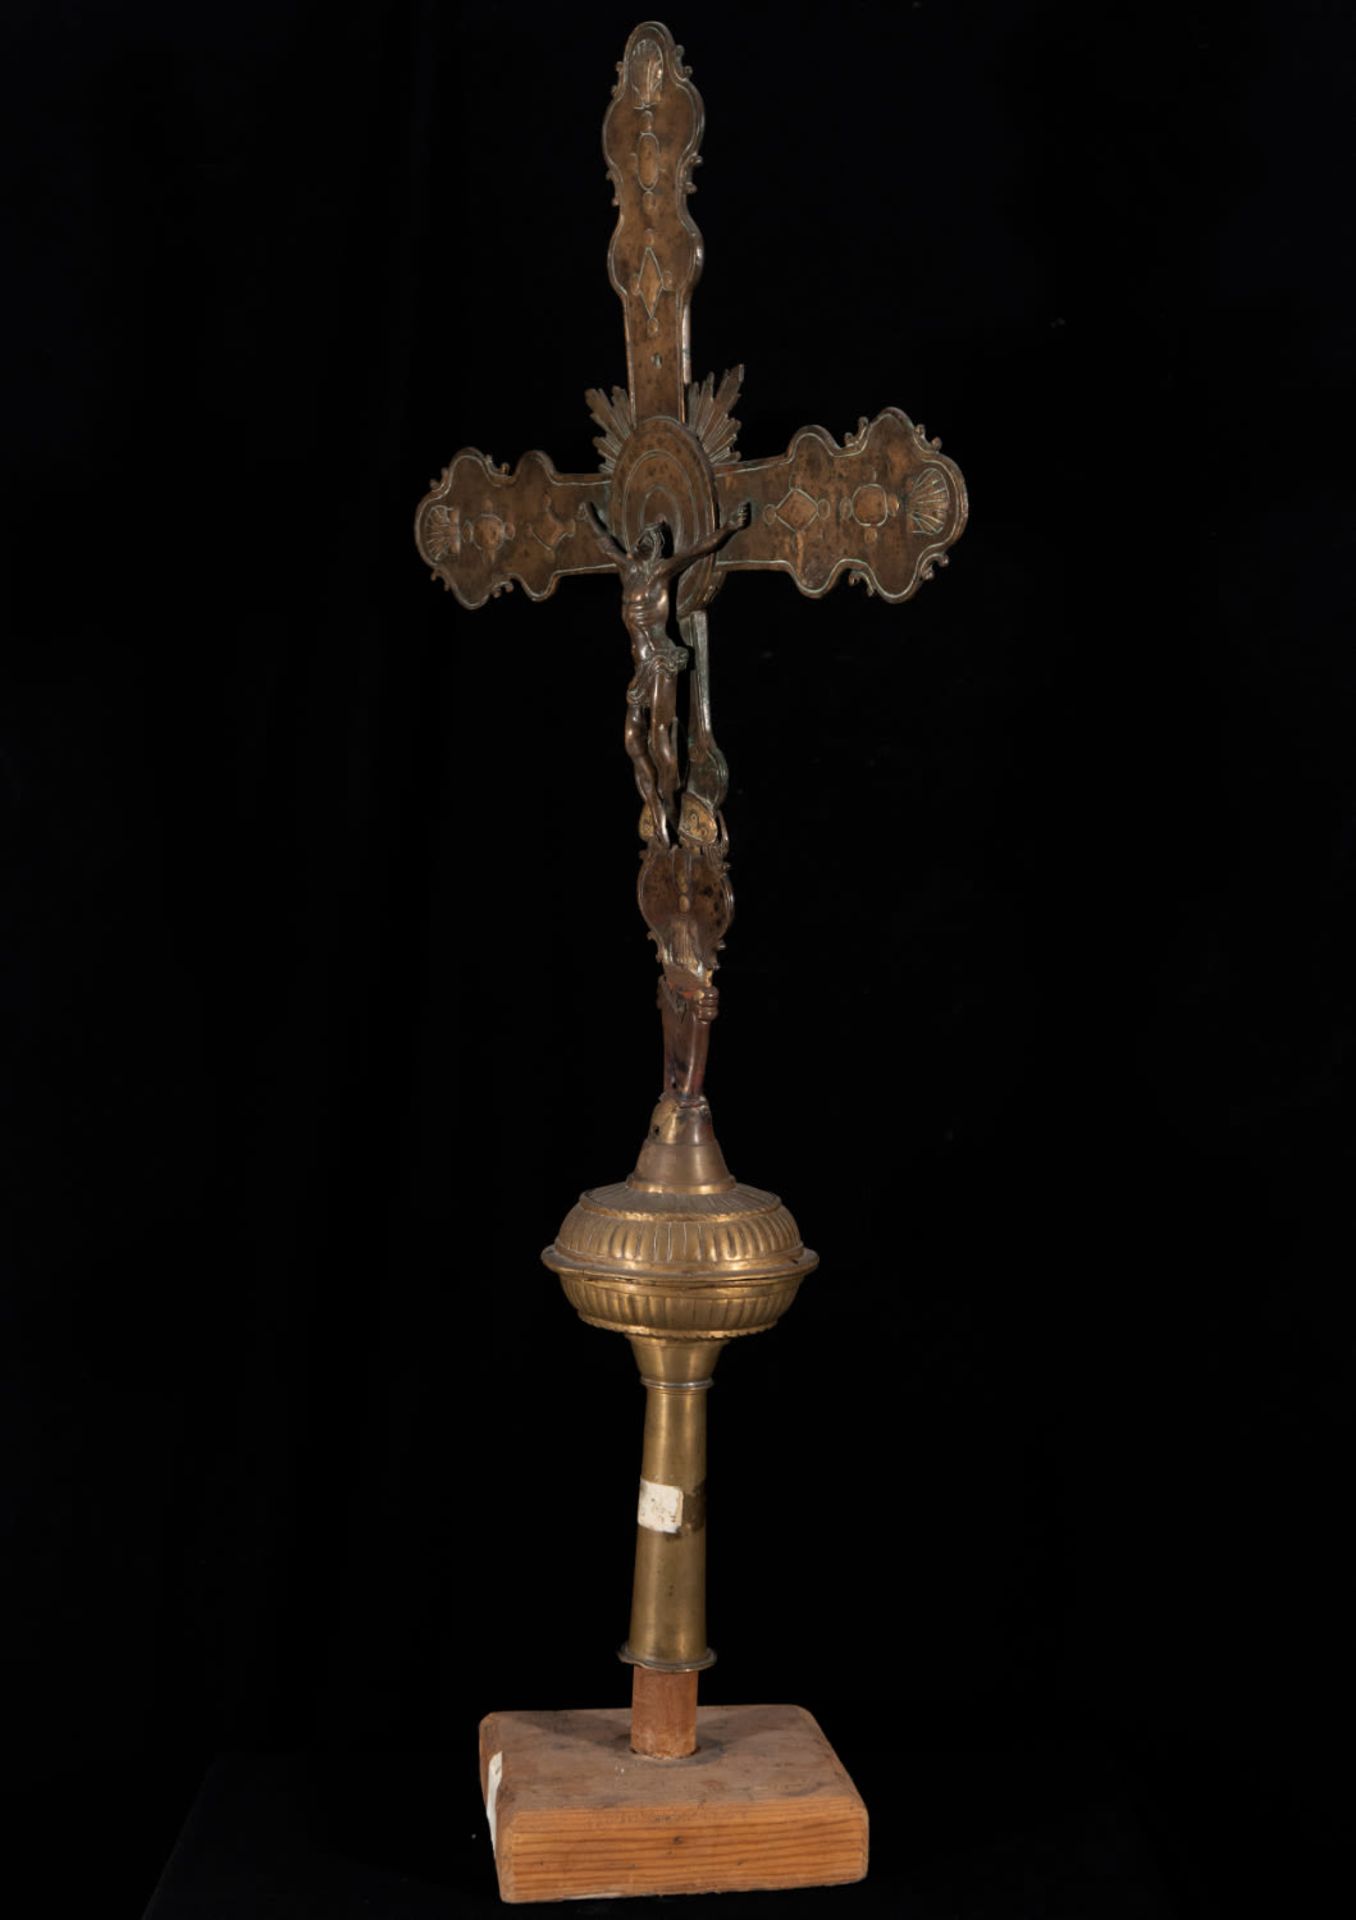 Large Tuscan Gothic Processional Cross of the 15th century - Image 4 of 6